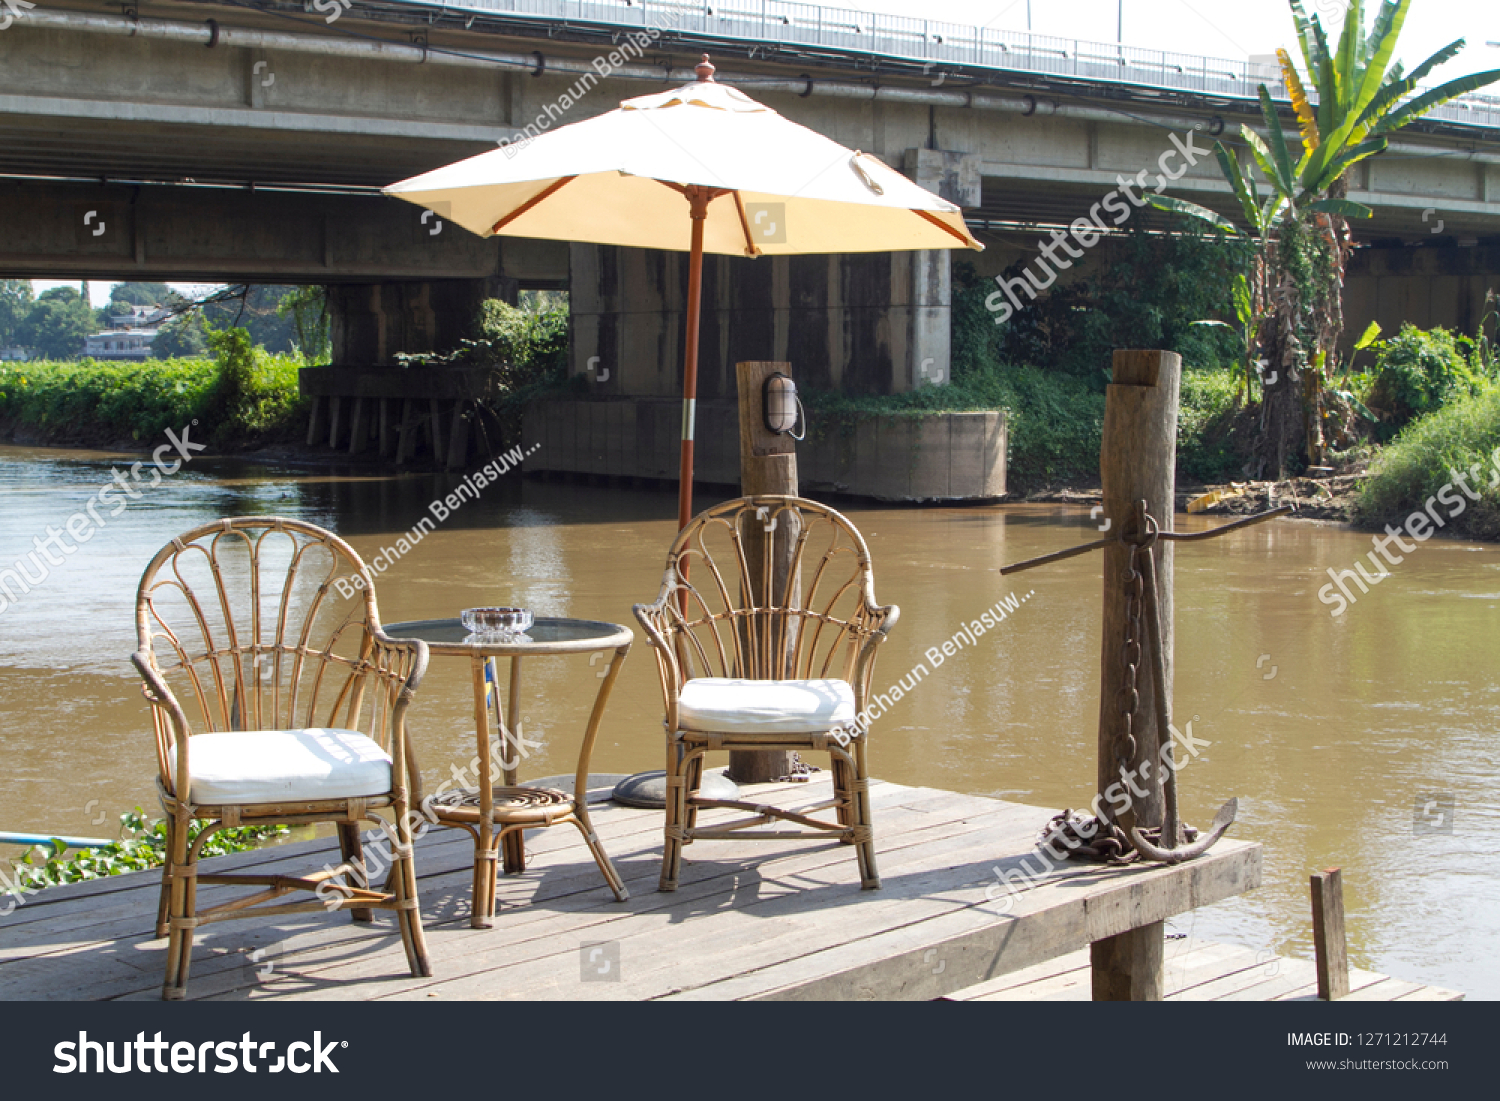 Two classic vintage chairs, table and white umbrella near river #1271212744